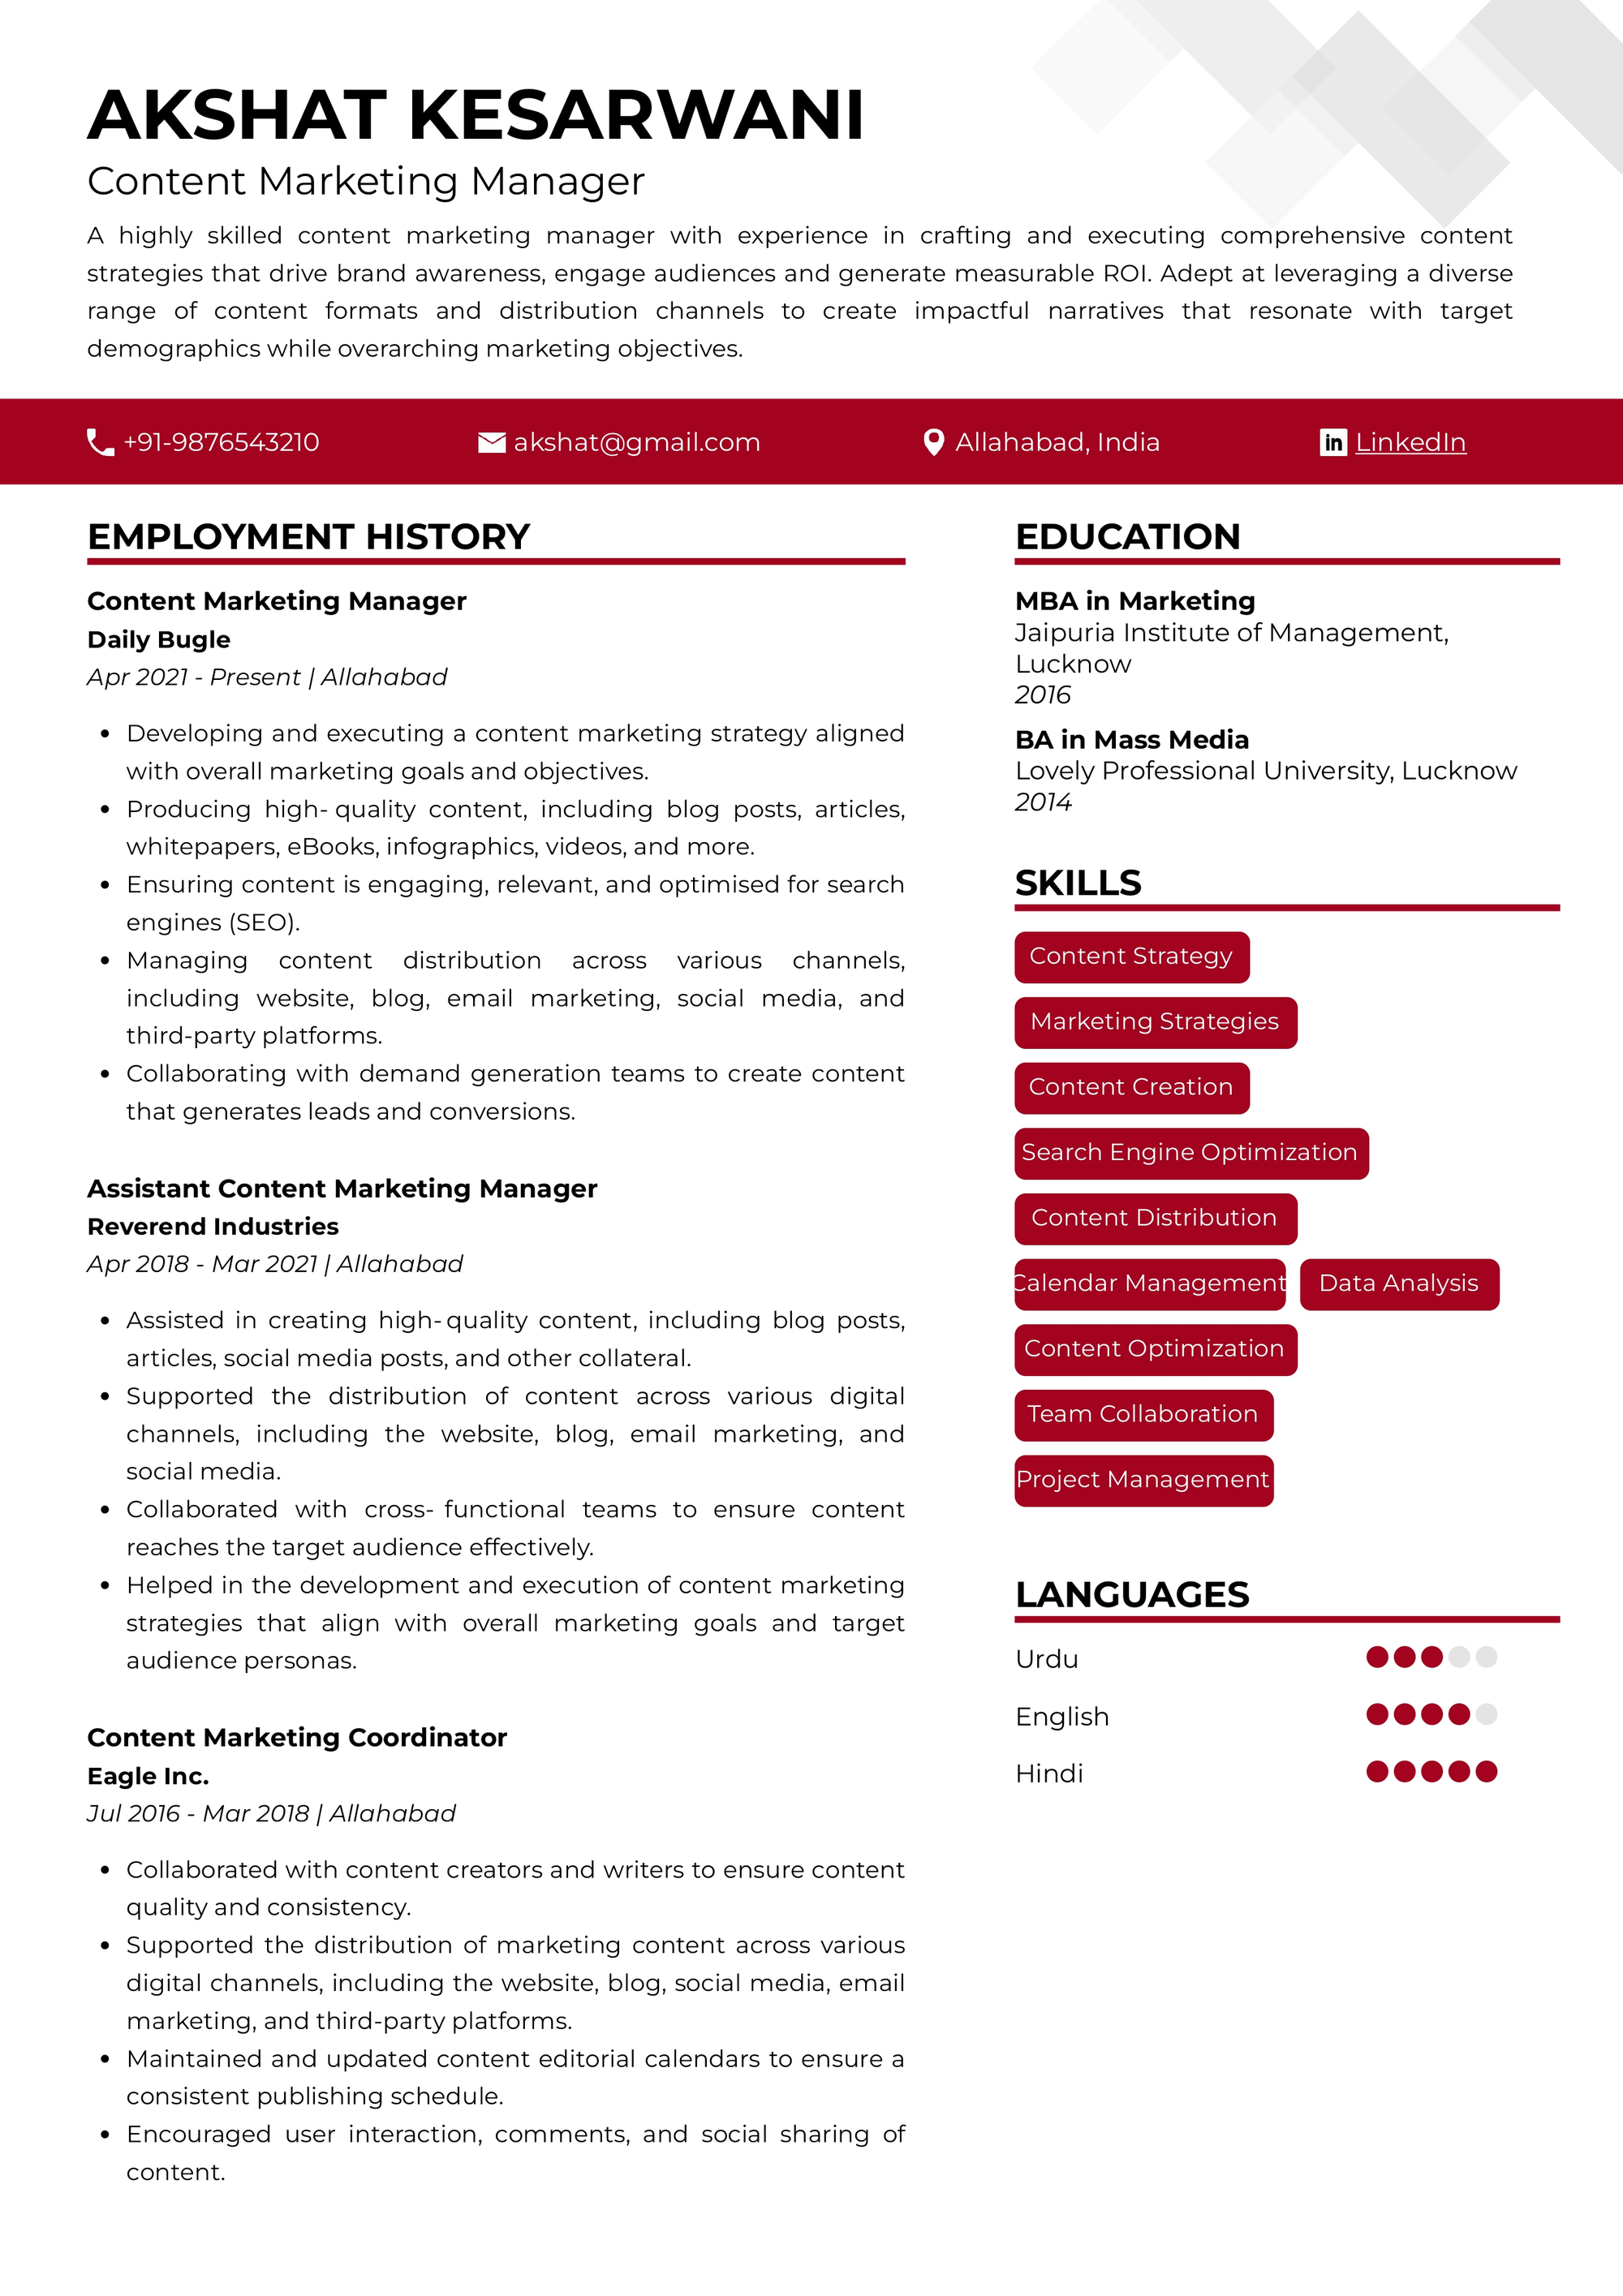 Top KPIs for a Standout Digital Marketing Resume